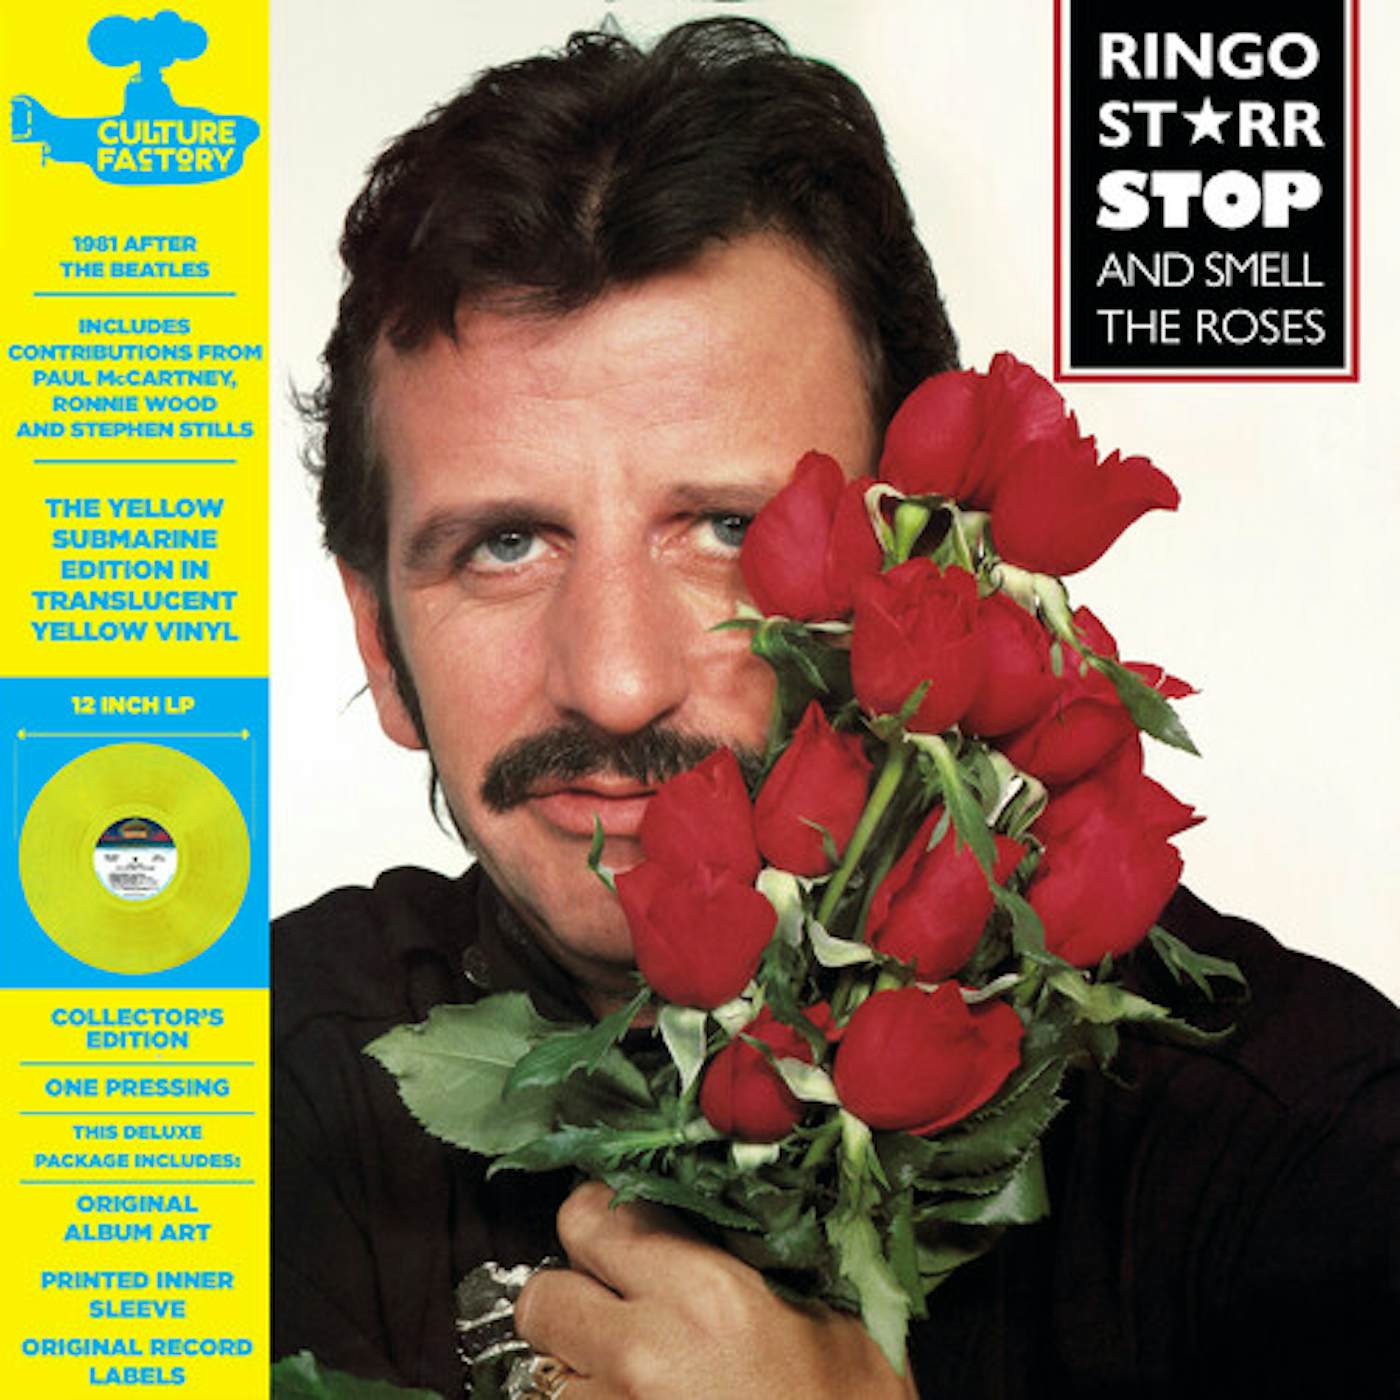 Ringo Starr Stop & Smell The Roses: Yellow Submarine Edition Vinyl Record